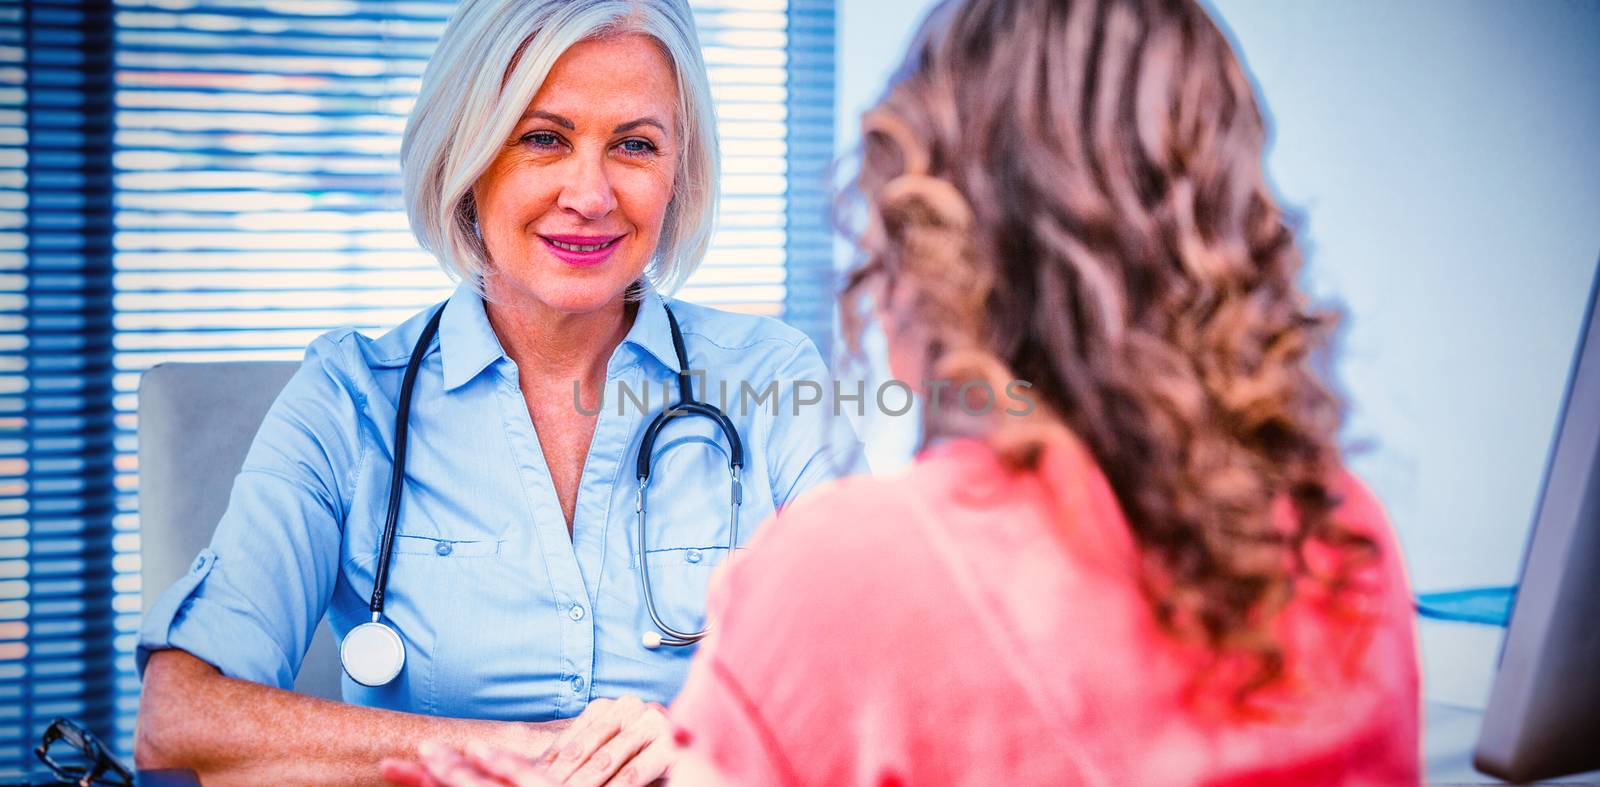 Patient consulting a doctor at the hospital